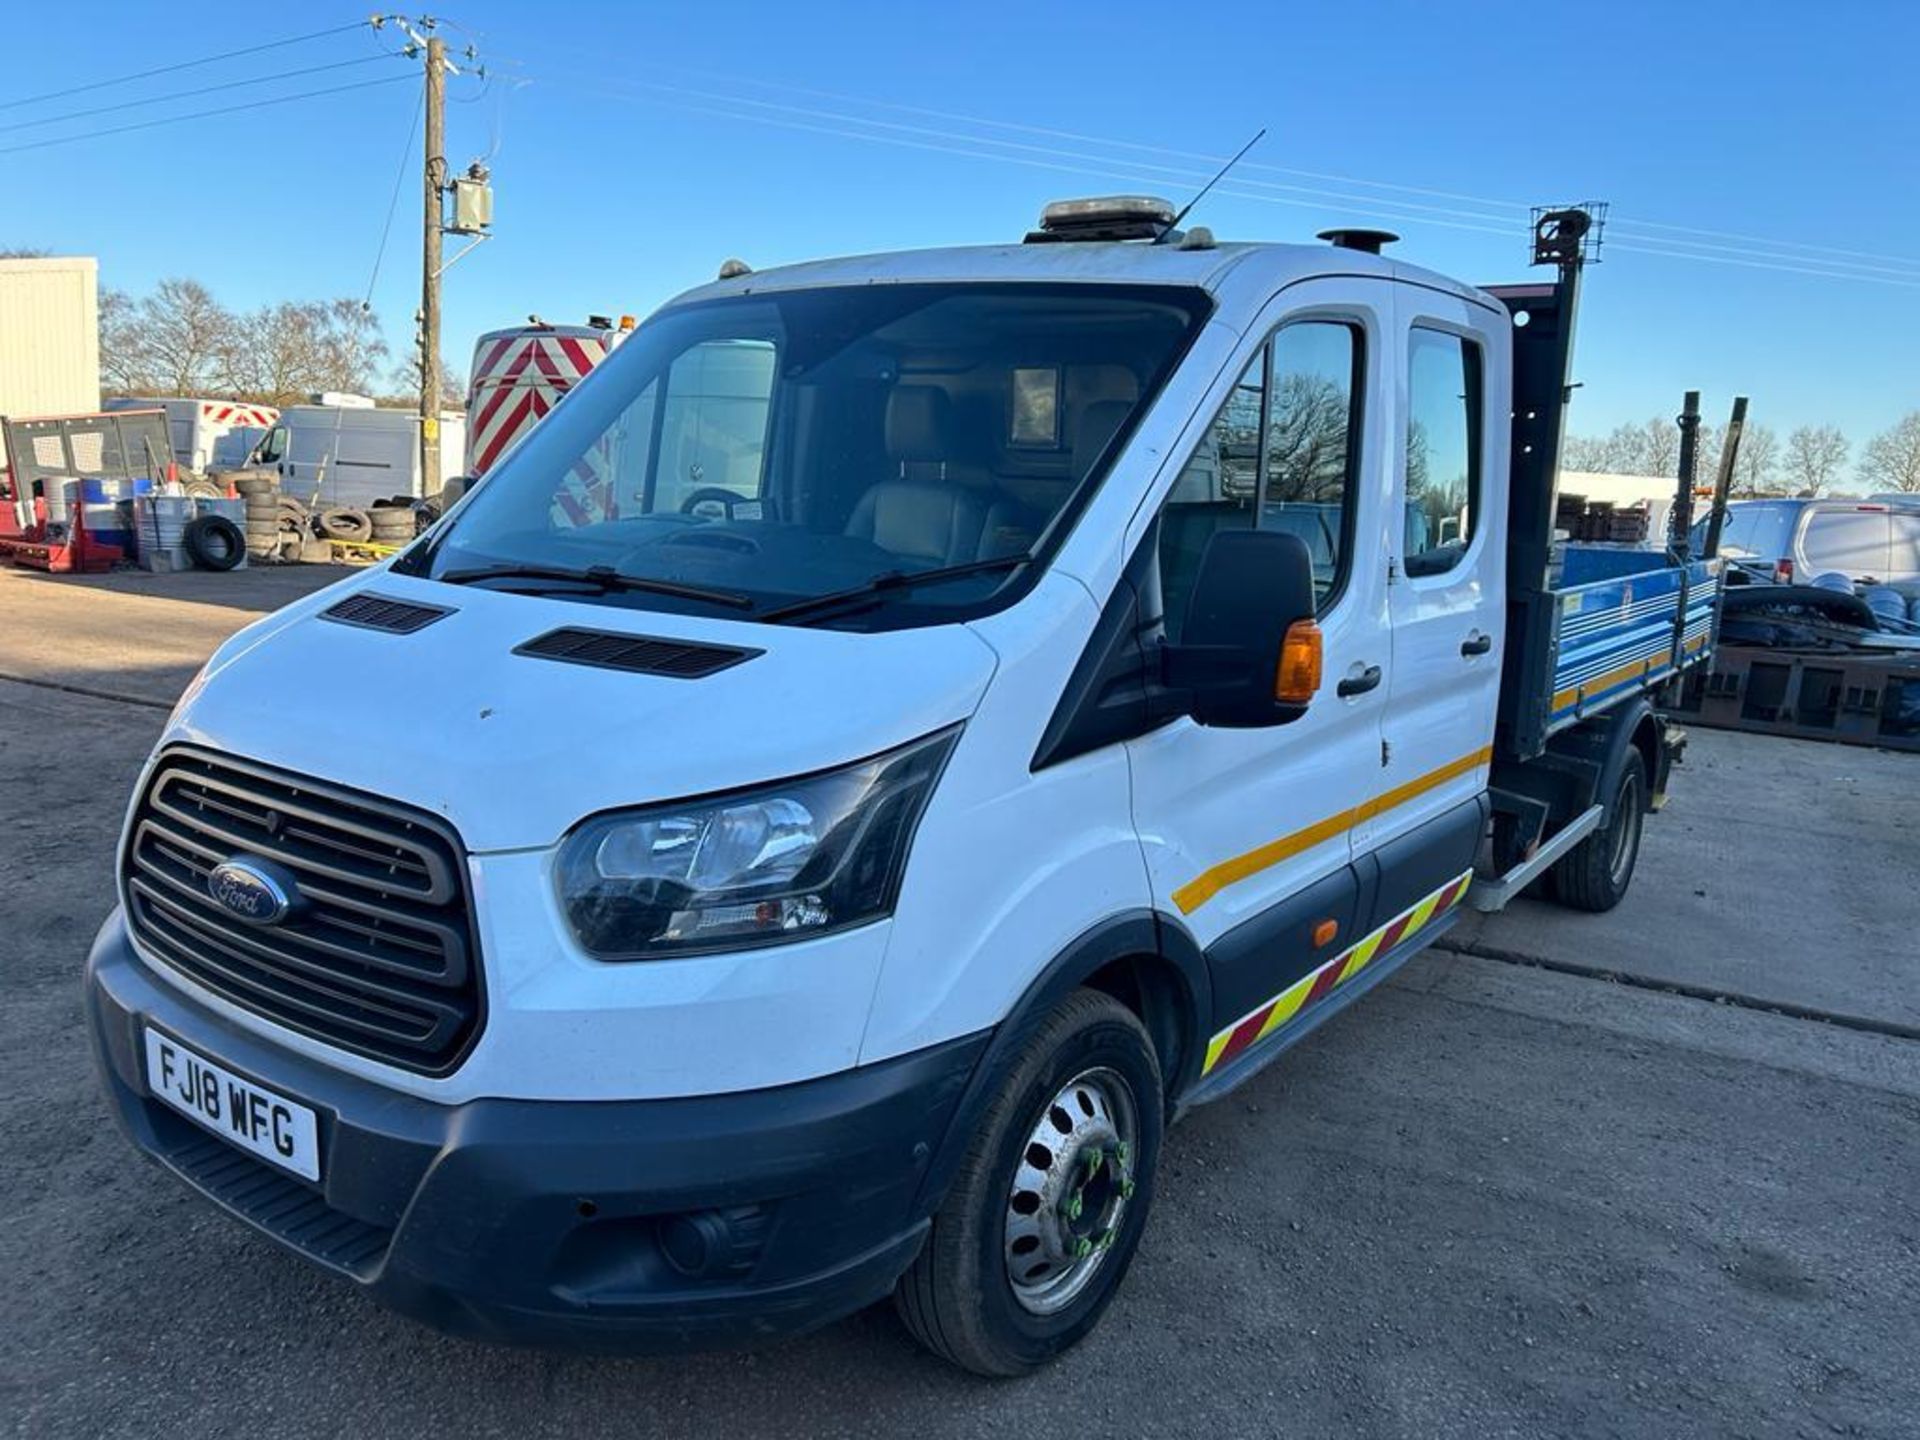 2018 18 FORD TRANSIT 470 TIPPER - 90K MILES - 4.7 TON GROSS - 3 SEATS - RARE TIPPER - TOWBAR  - Image 6 of 11